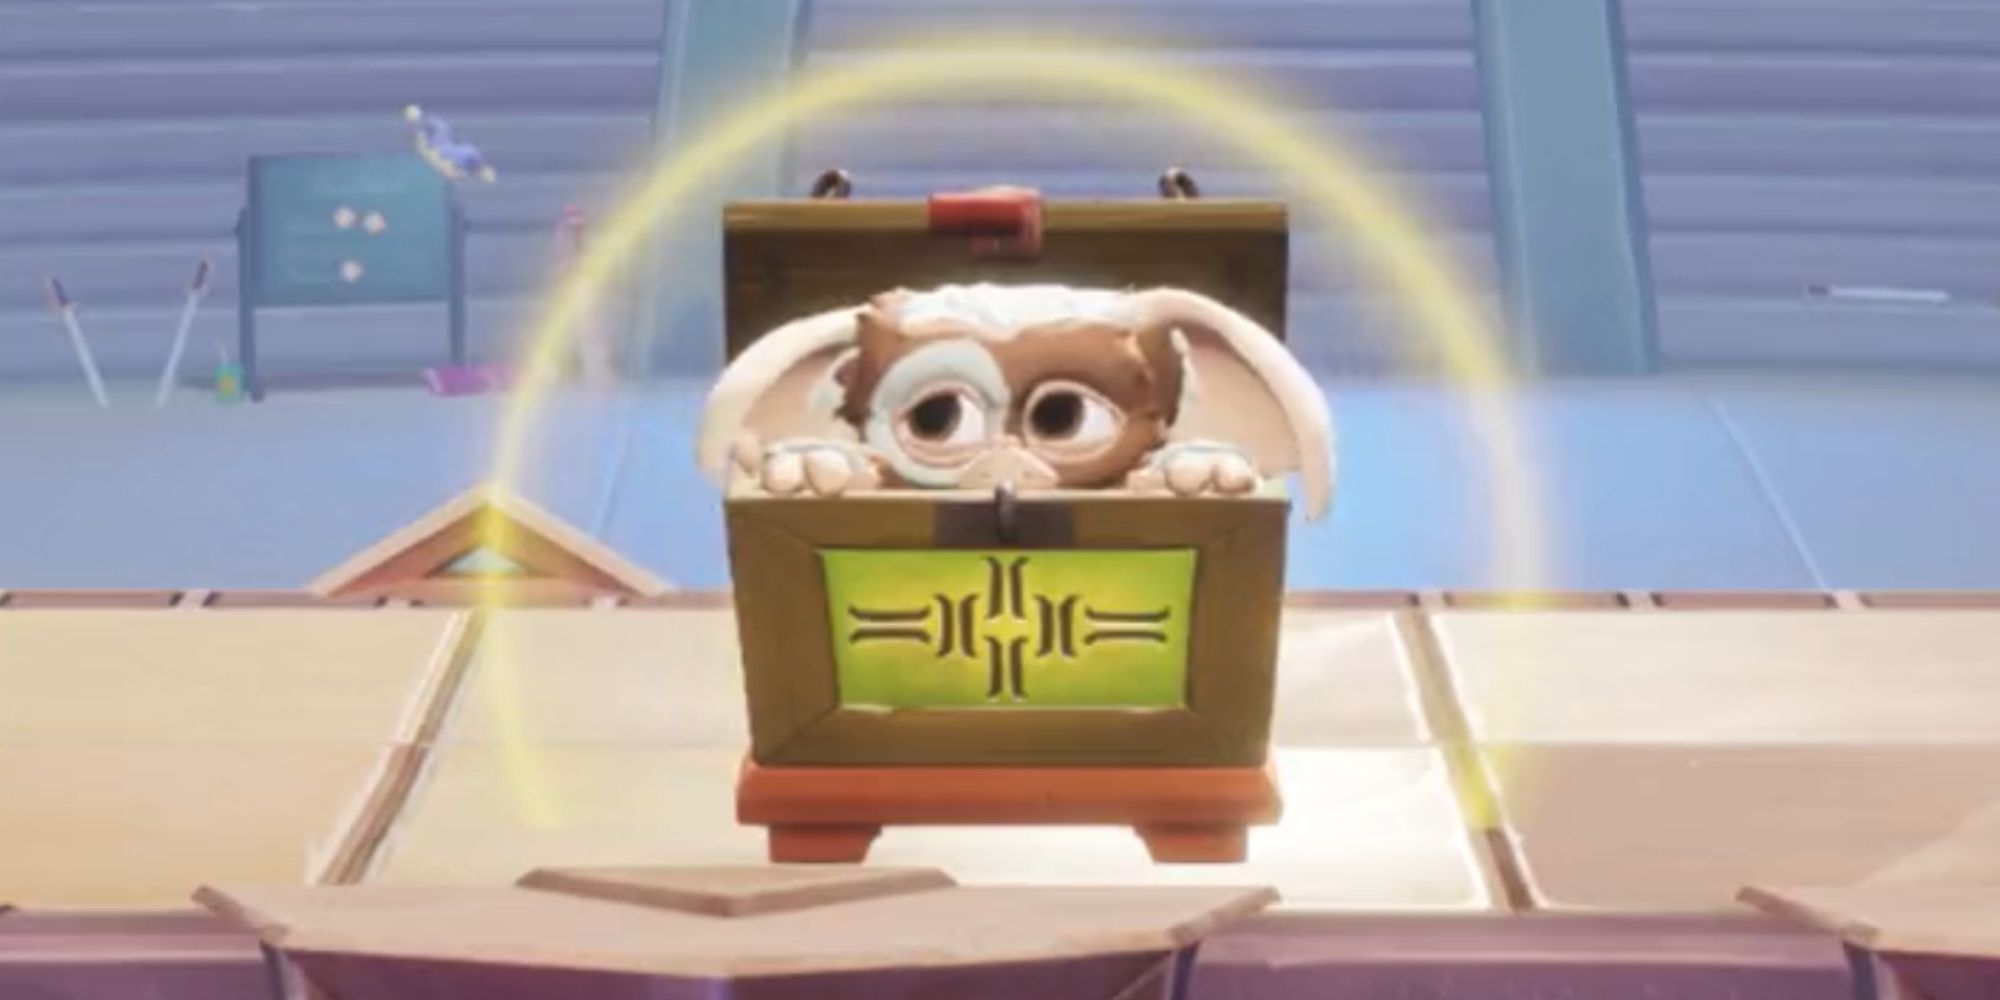 Gizmo in a crate